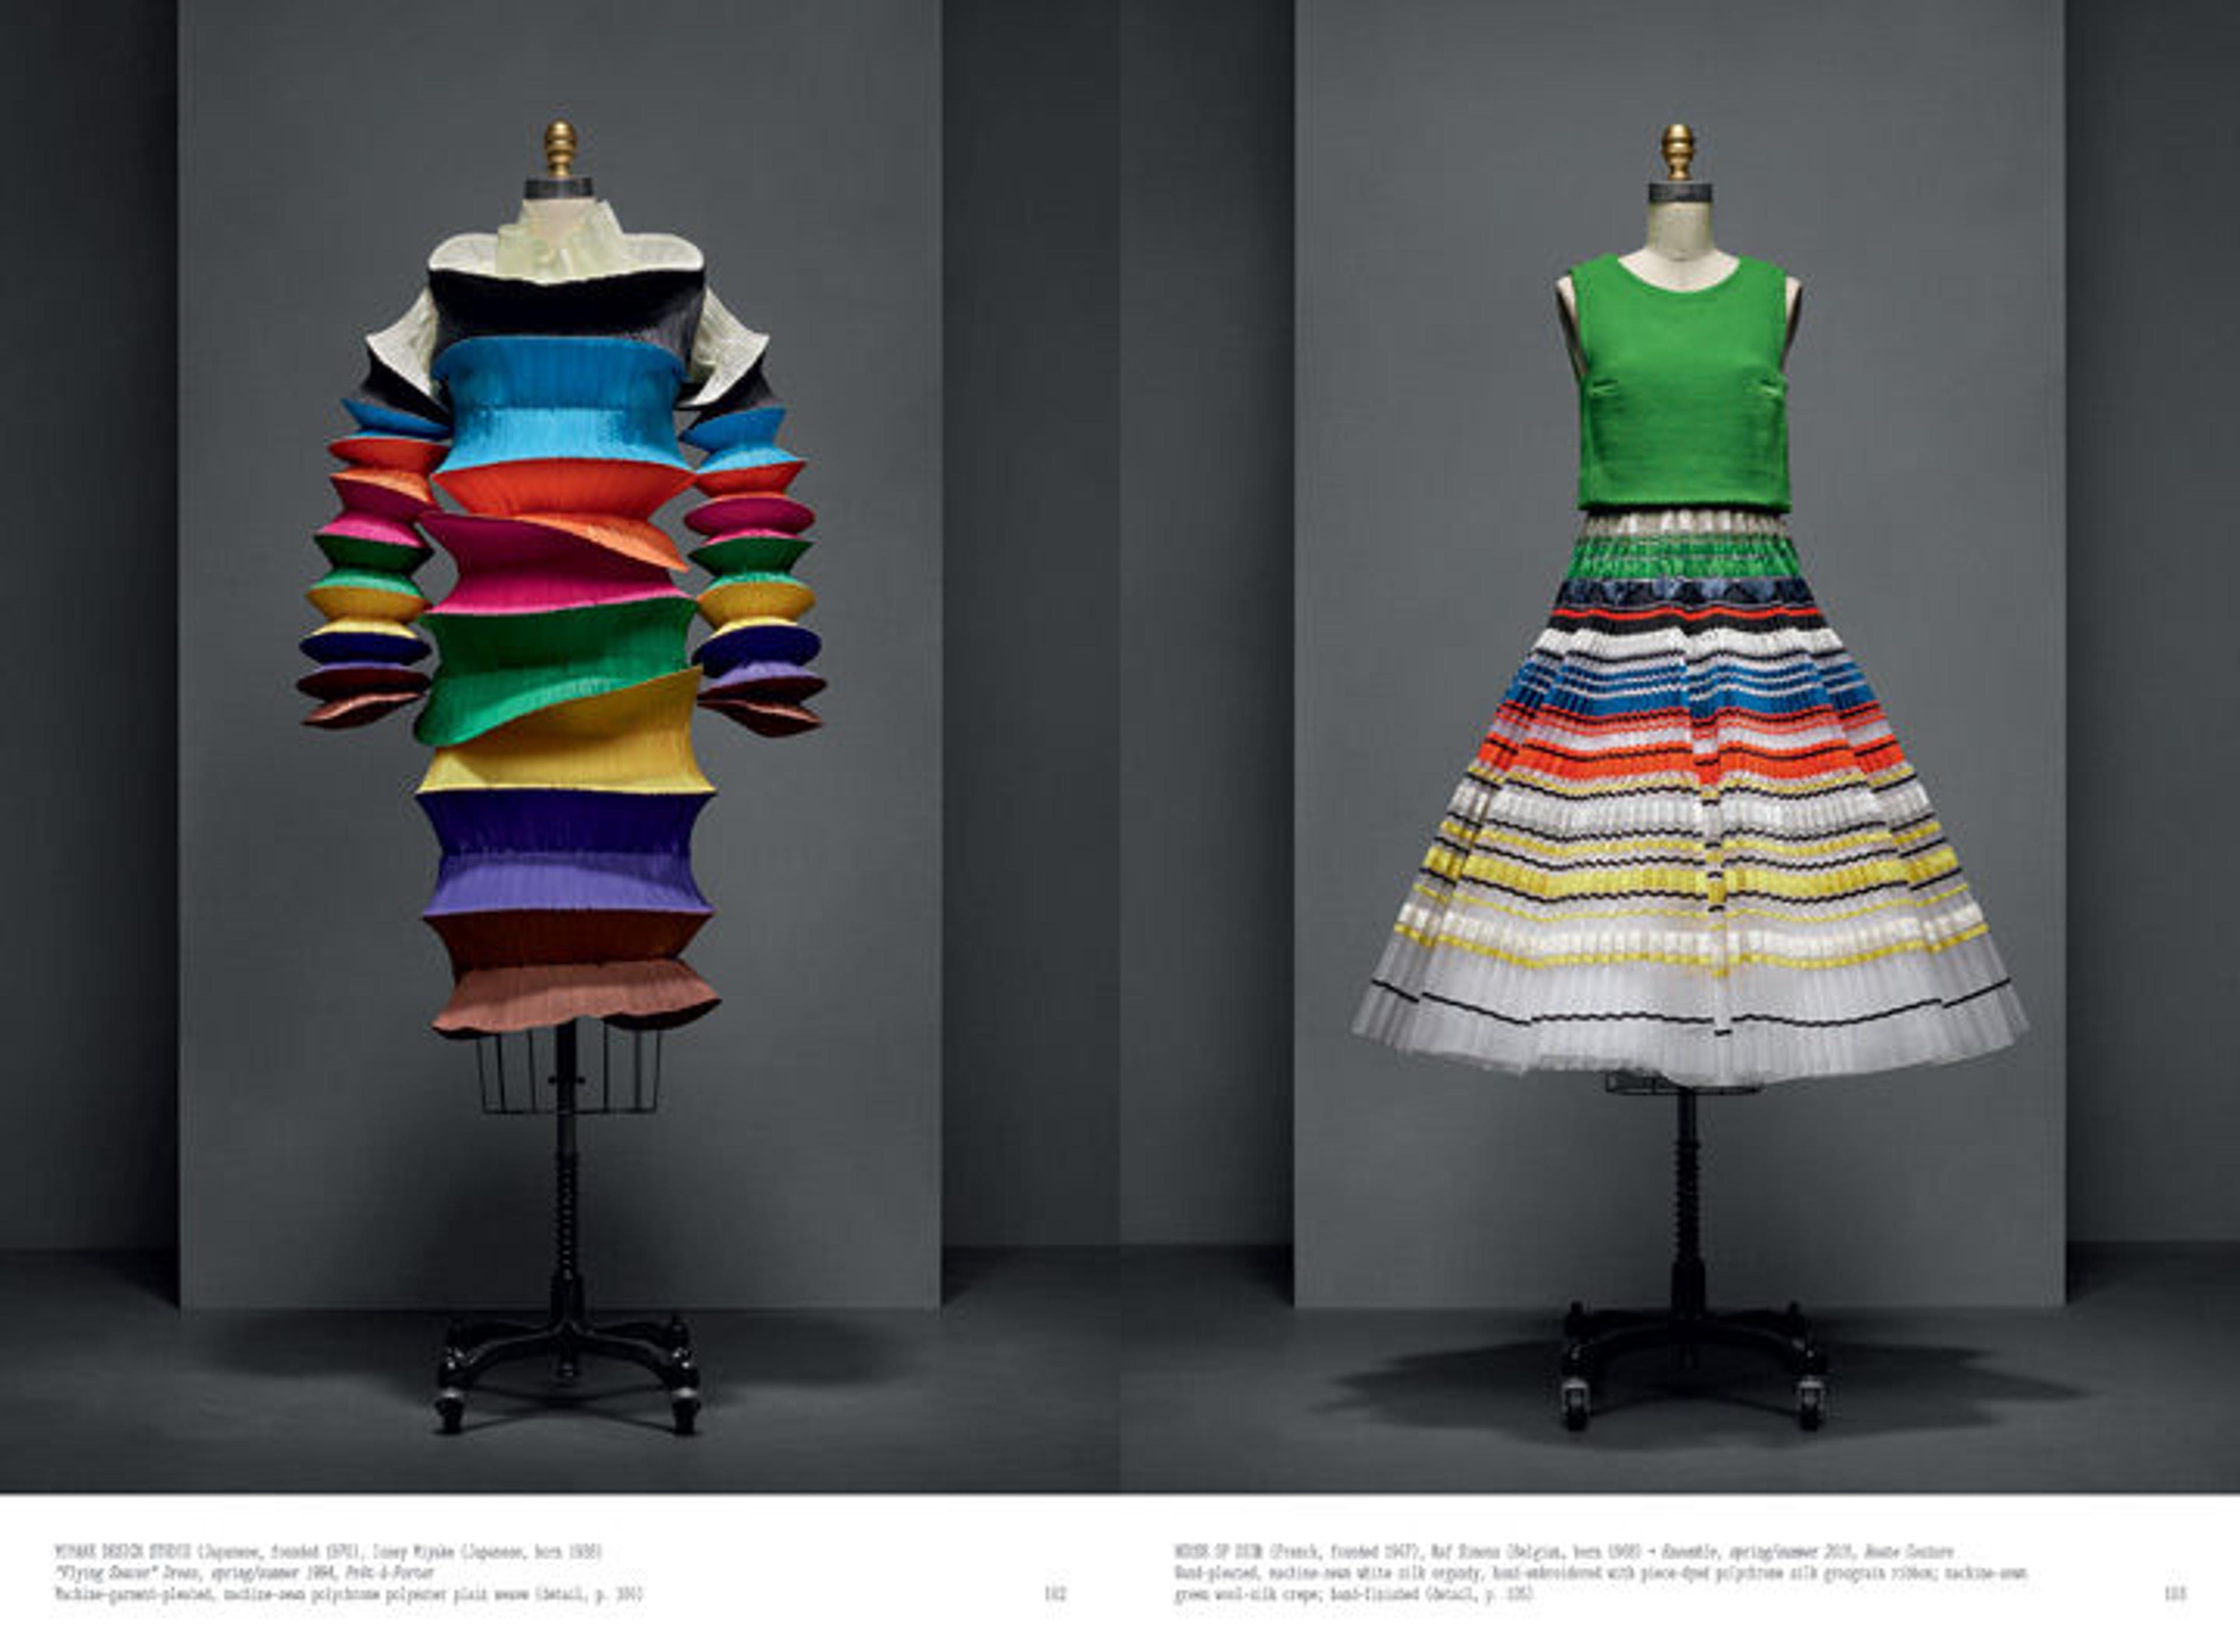 Spread from the publication showing two colorful dresses